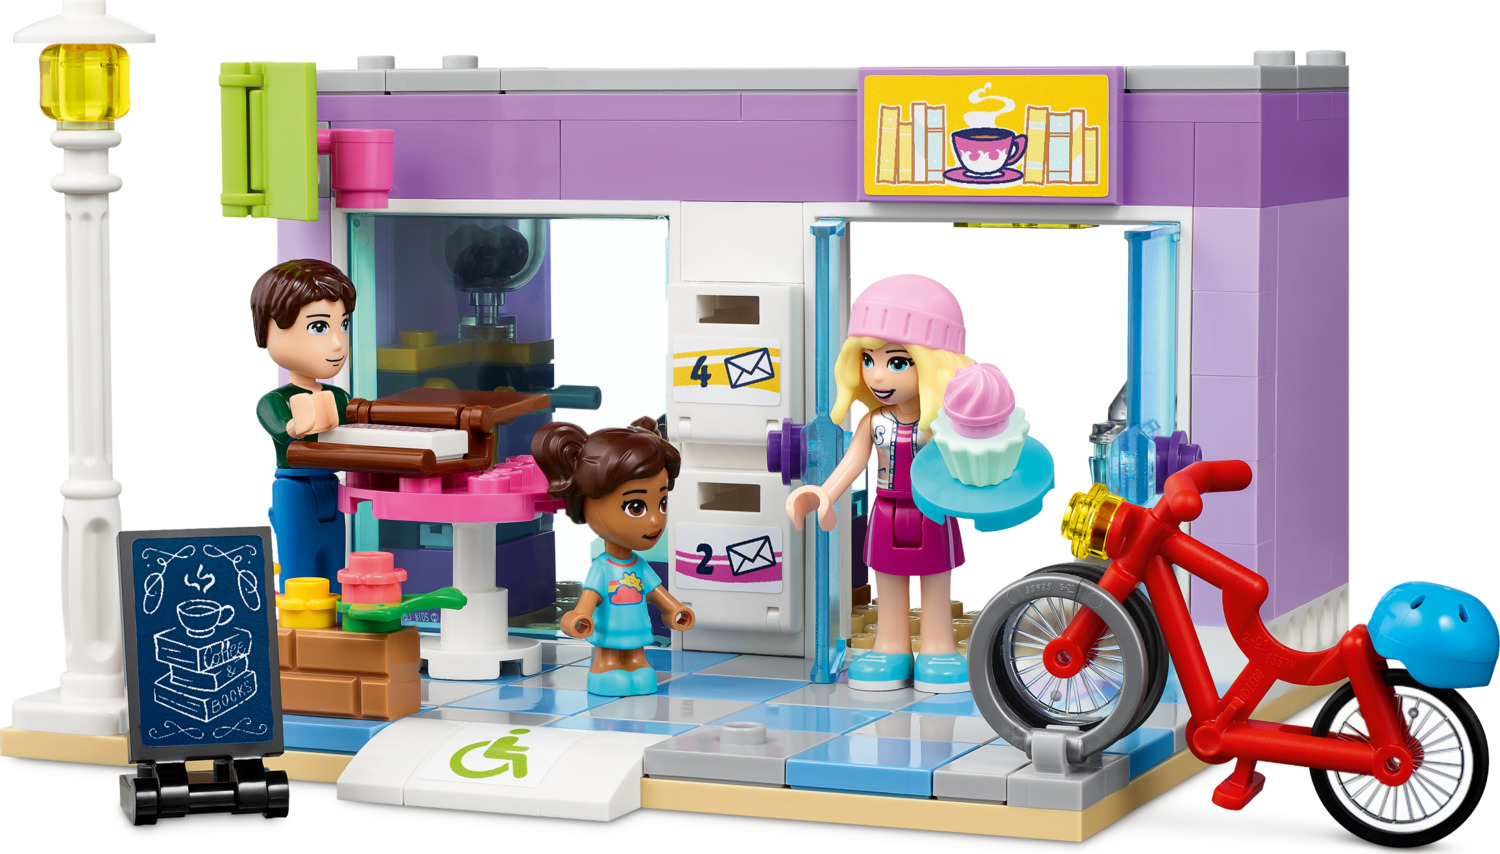 LEGO Friends: Main Street Building - Toys To Love